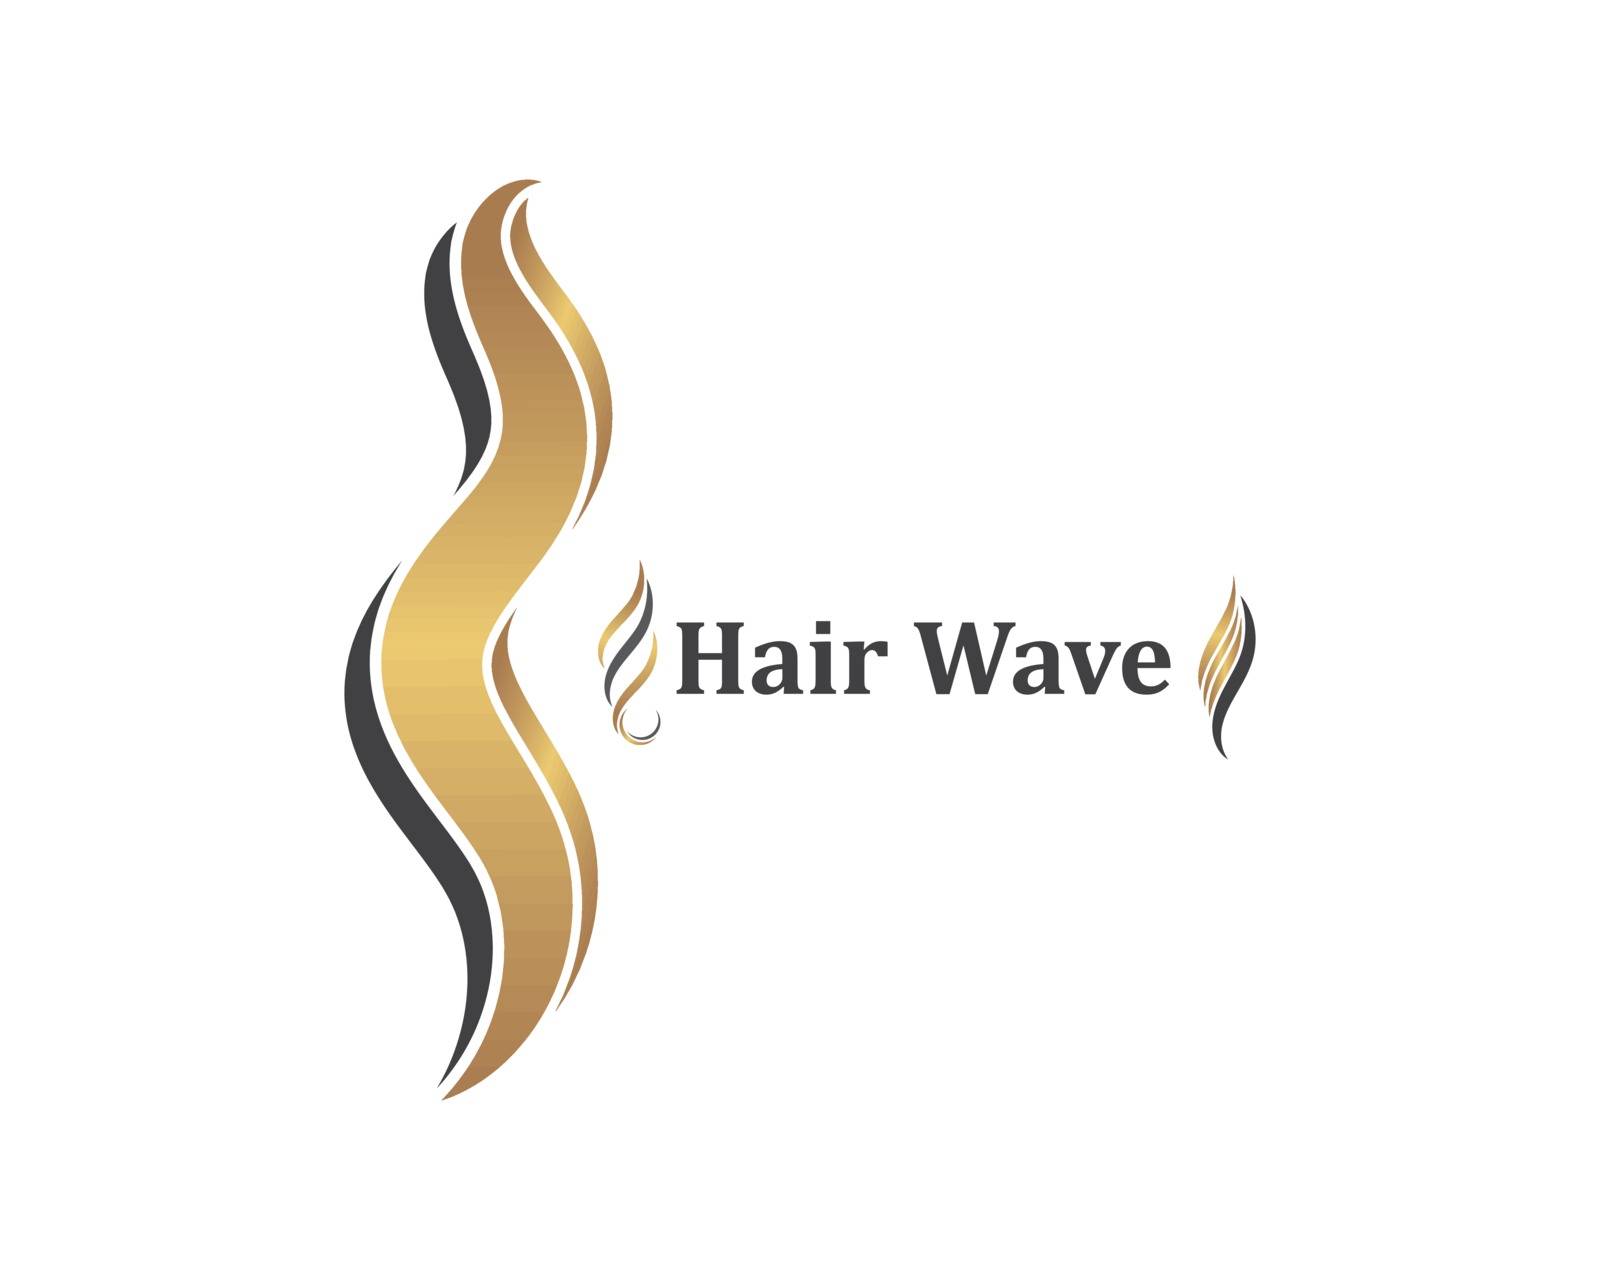 hair wave icon vector illustratin design symbol of hairstyle and by idan